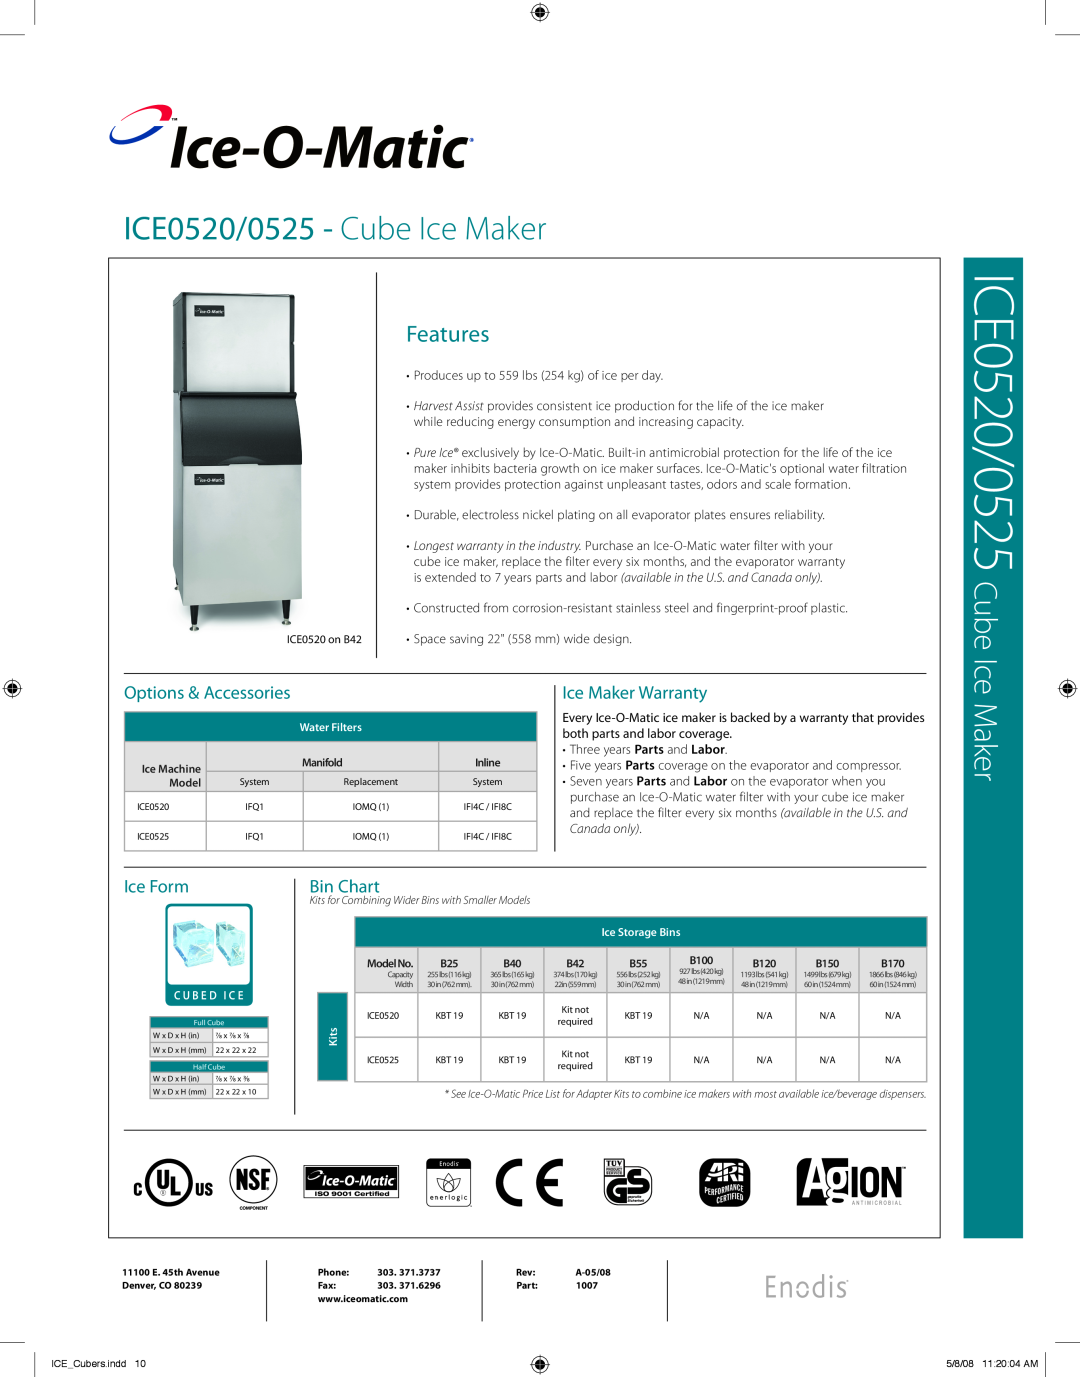 Ice-O-Matic ICE0525 warranty Ice-O-Matic, Options & Accessories, Ice Maker Warranty, Ice Form, Bin Chart, Features 